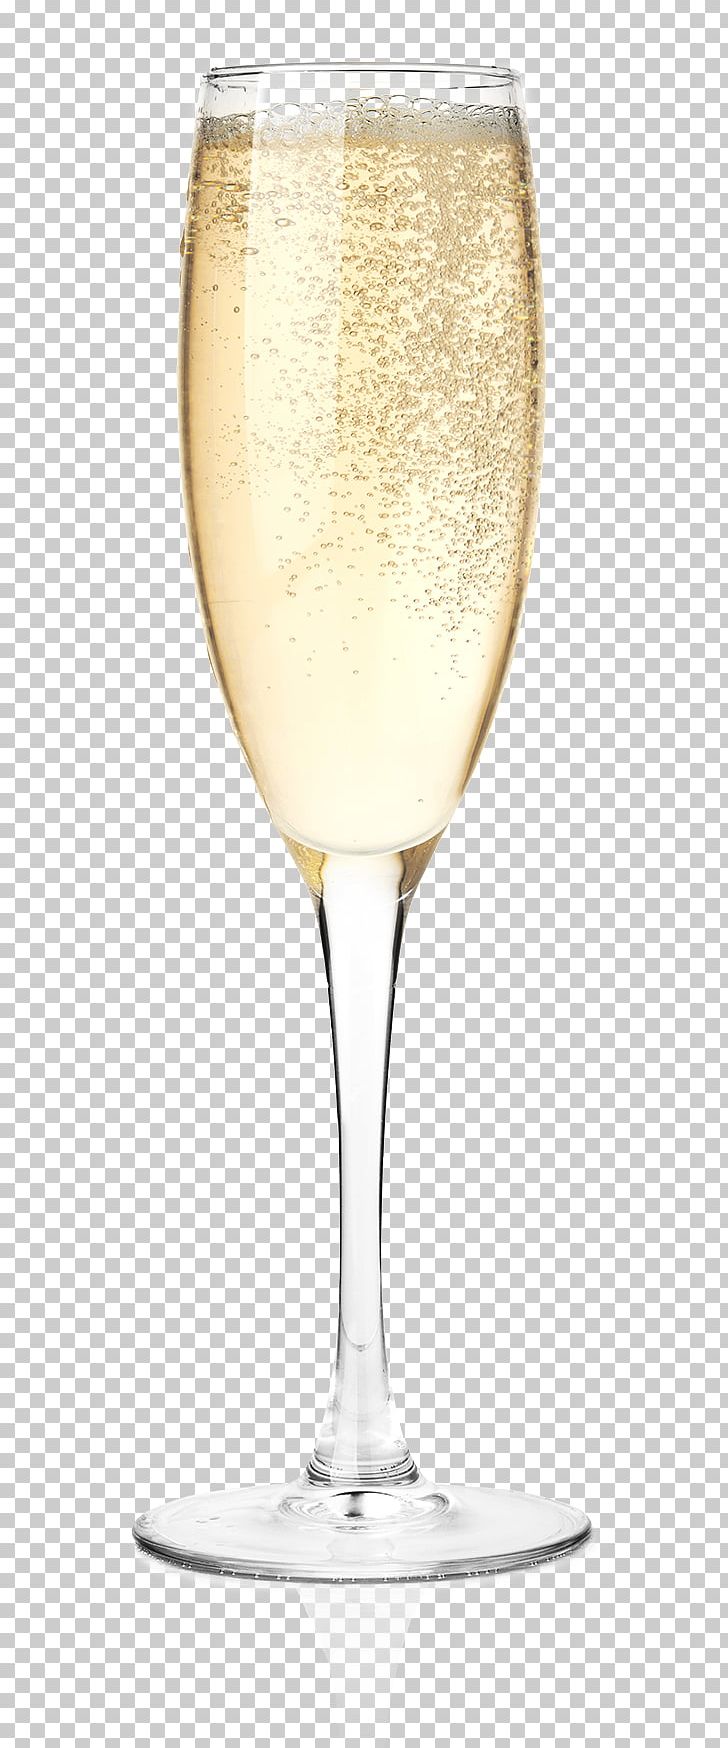 Champagne Cocktail Wine Glass Champagne Glass PNG, Clipart, Alcoholic Drink, Bauman, Beer Glass, Beer Glasses, Champagne Free PNG Download